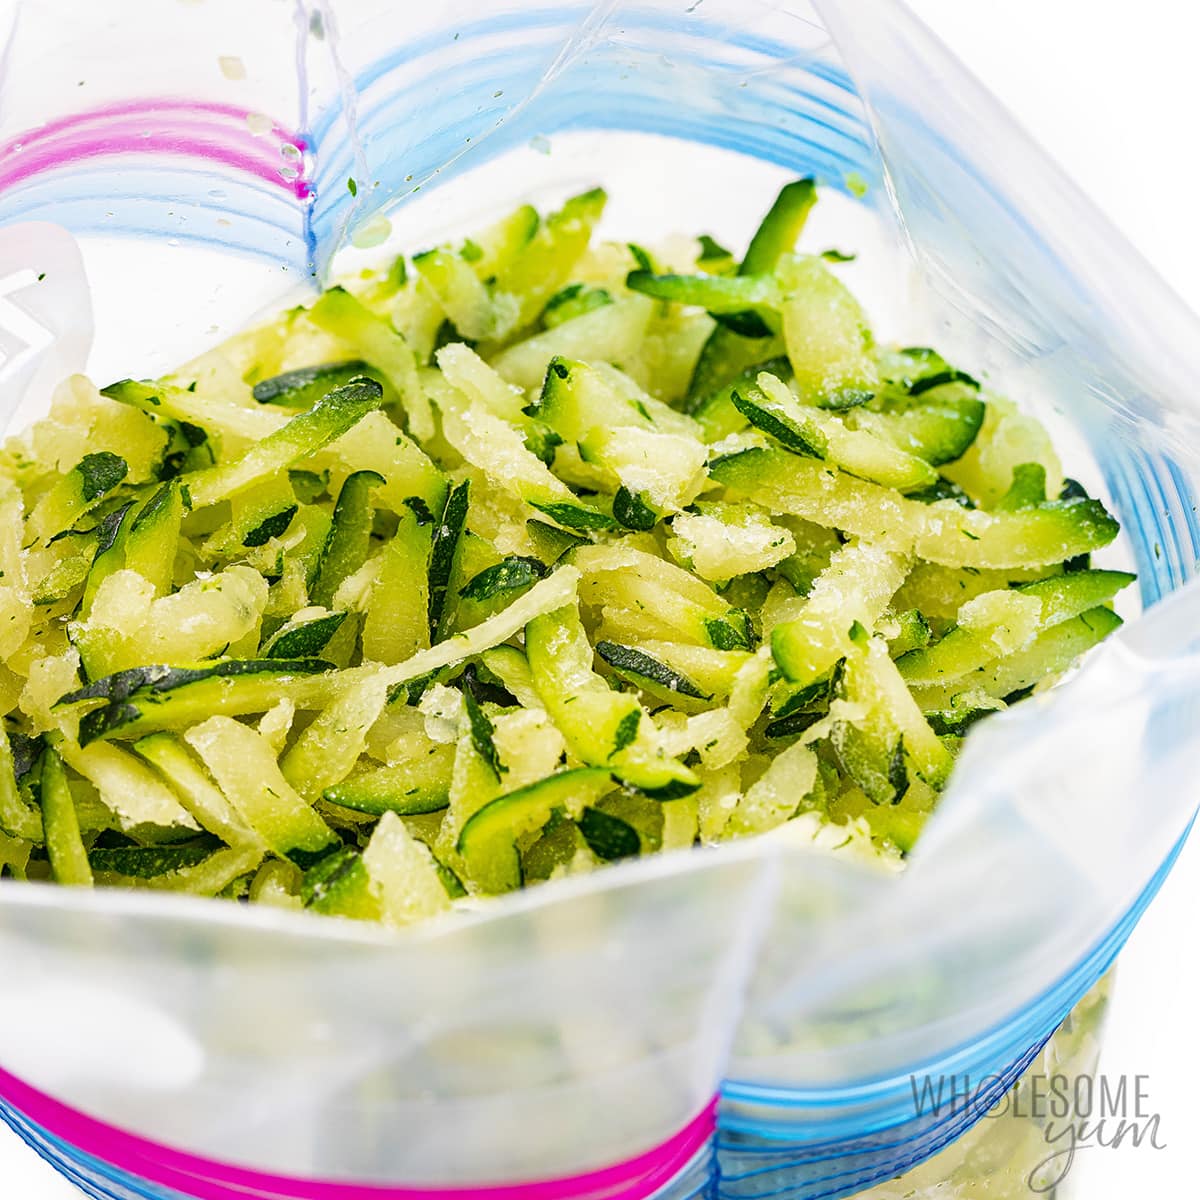 Shredded zucchini placed in a zip lock bag for freezing.